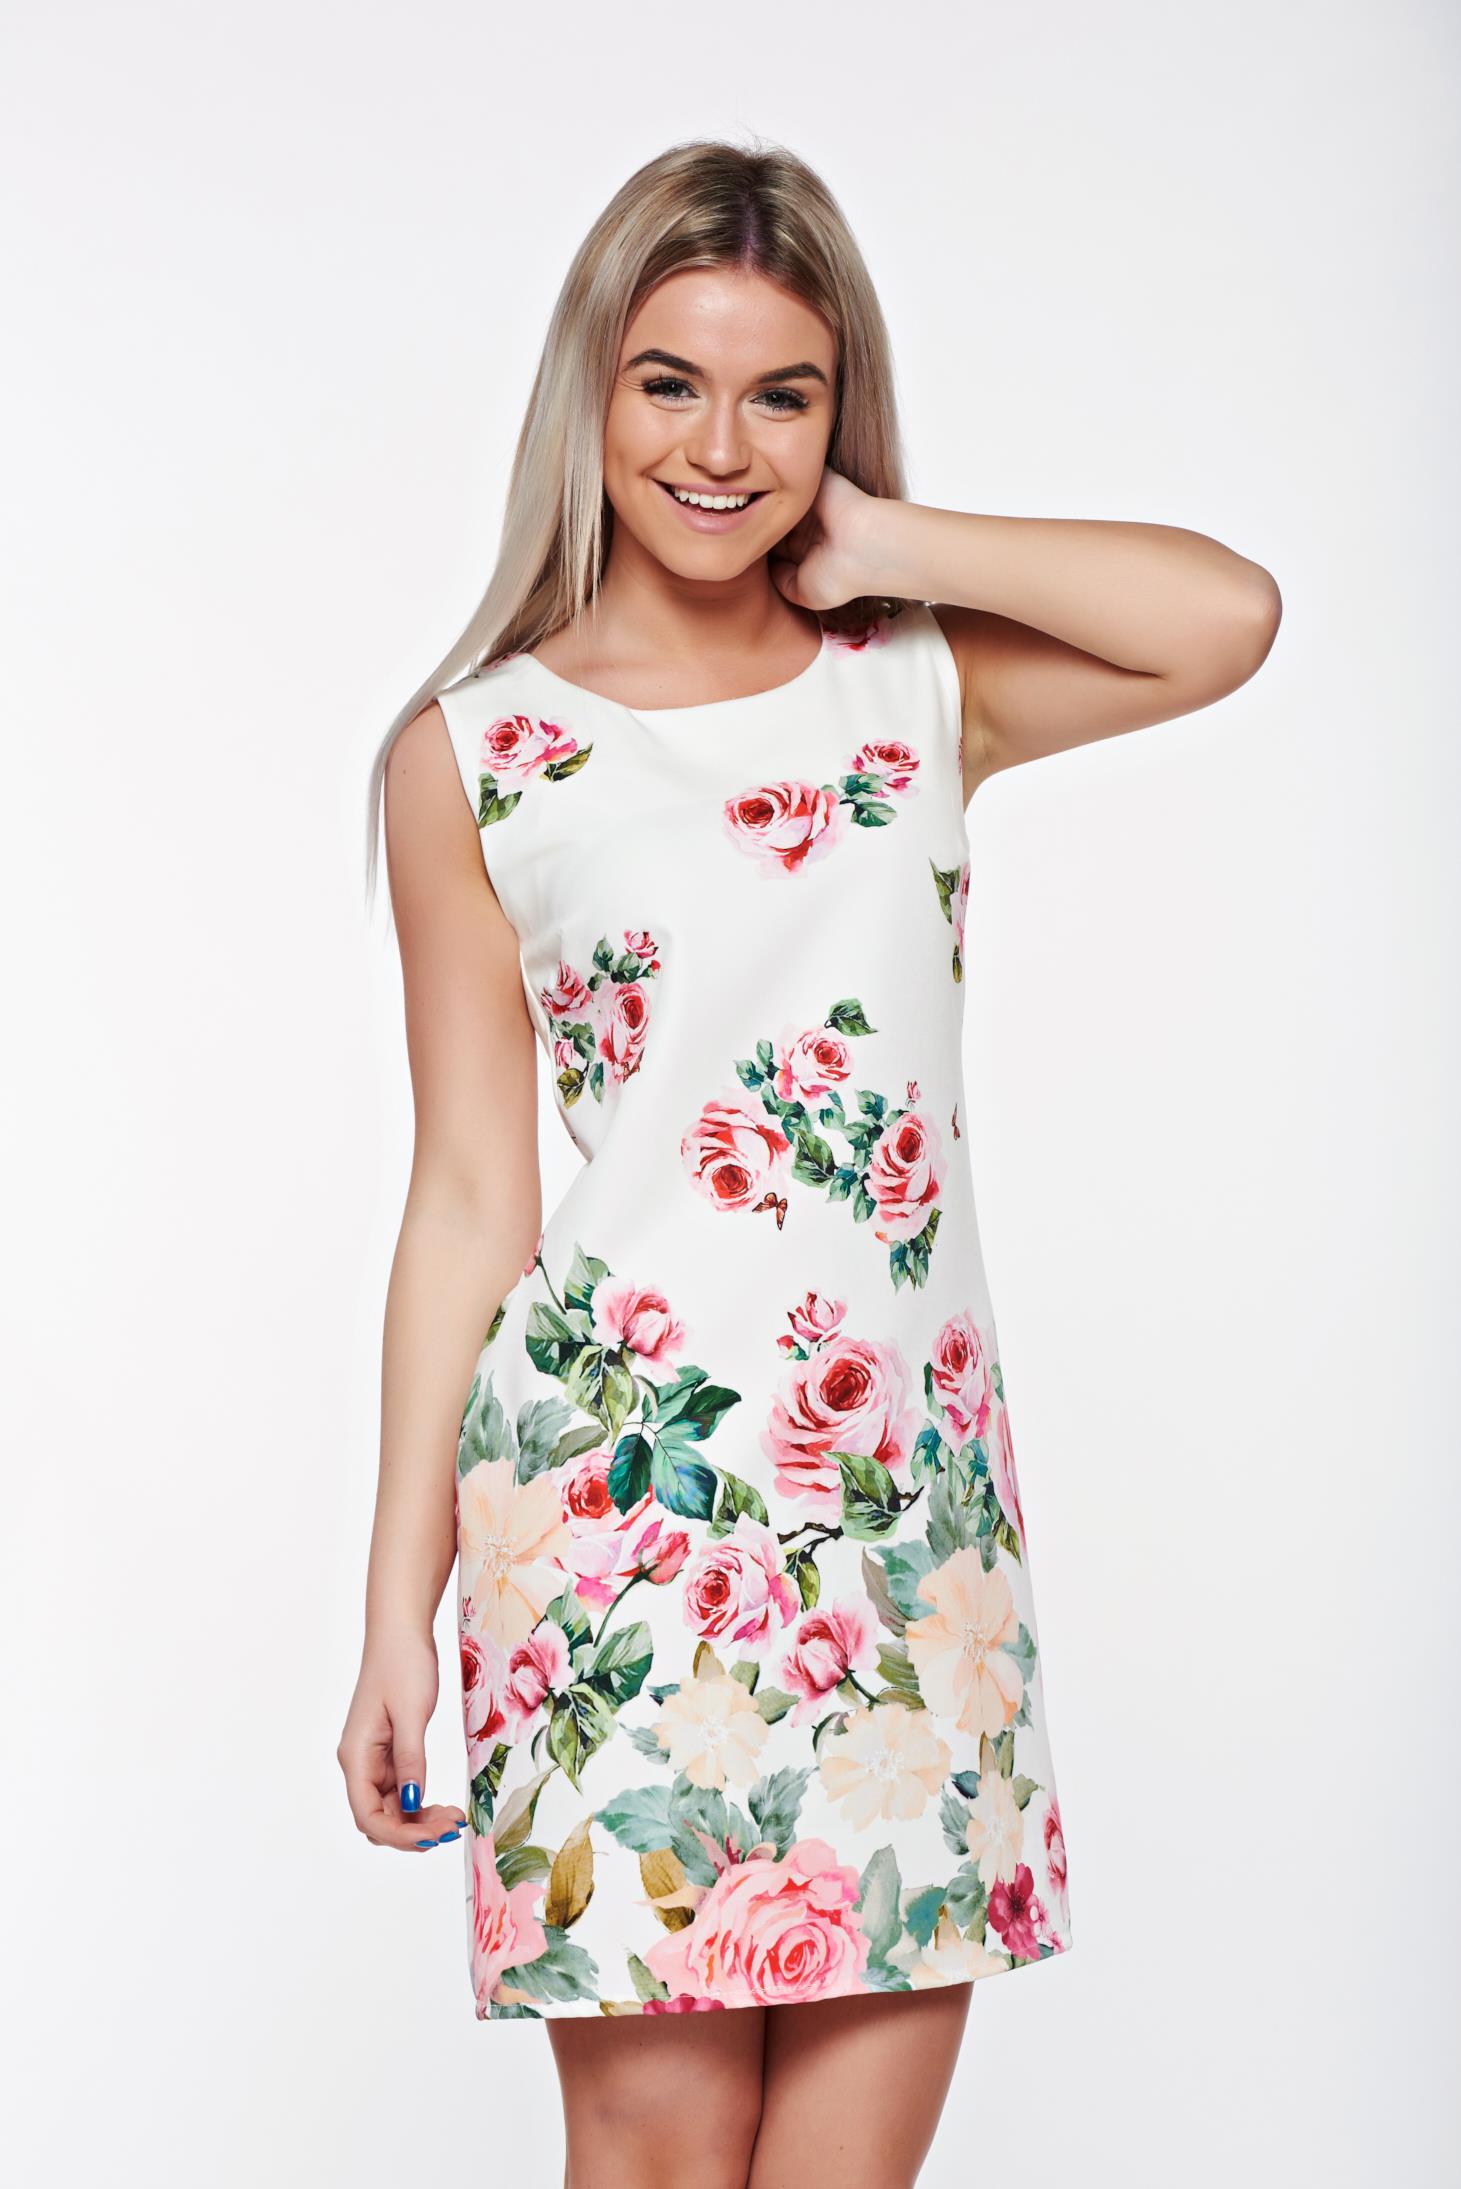 SunShine white elegant a-line dress with floral prints with easy cut